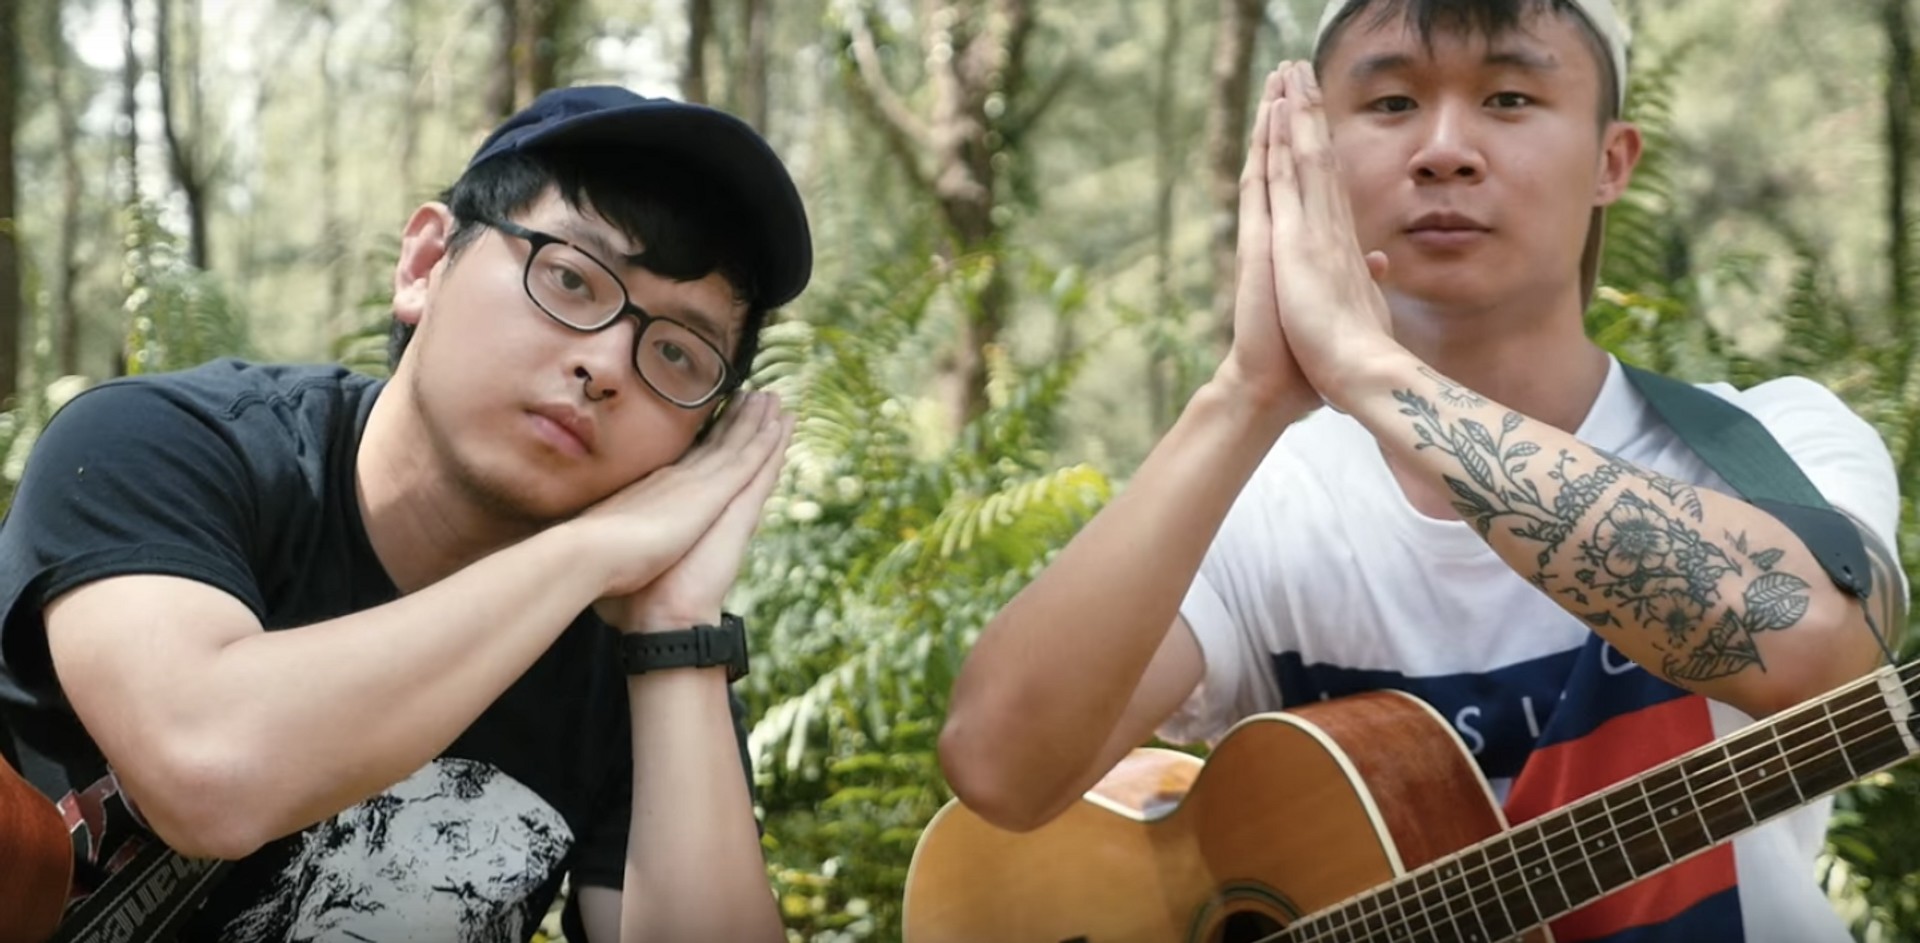 WATCH: Forests hike a Coney Island forest to perform 'Tamago' for Bandwagon Sessions